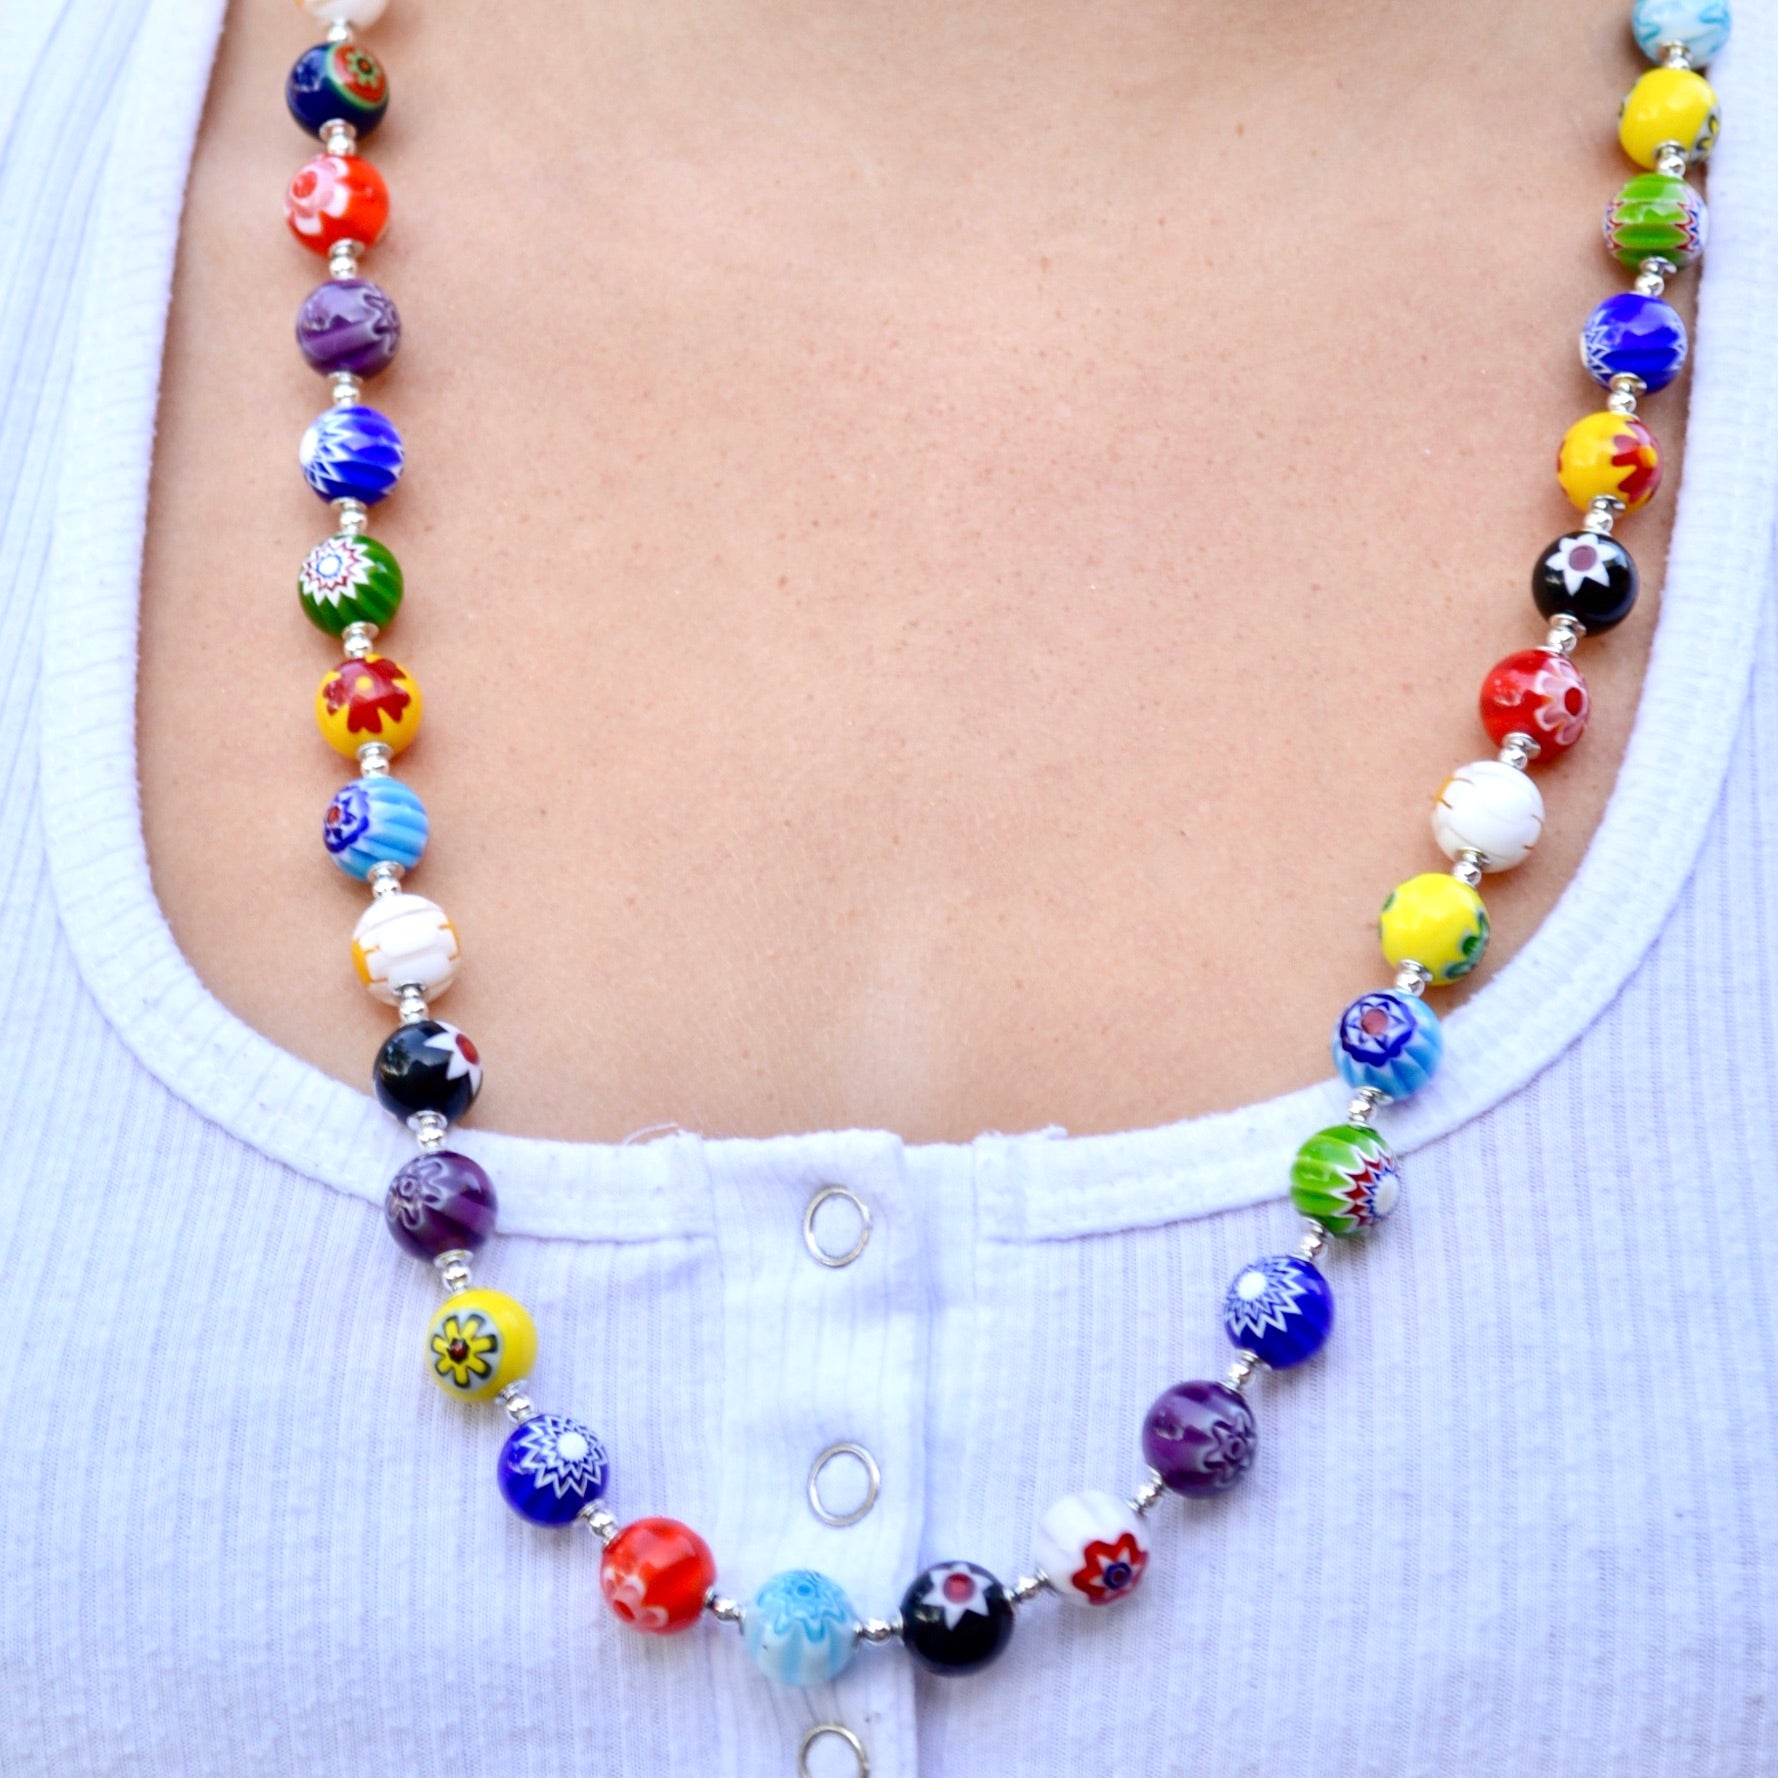 Buy China Wholesale Handmade Jewelry Colorful Beads Necklace Women